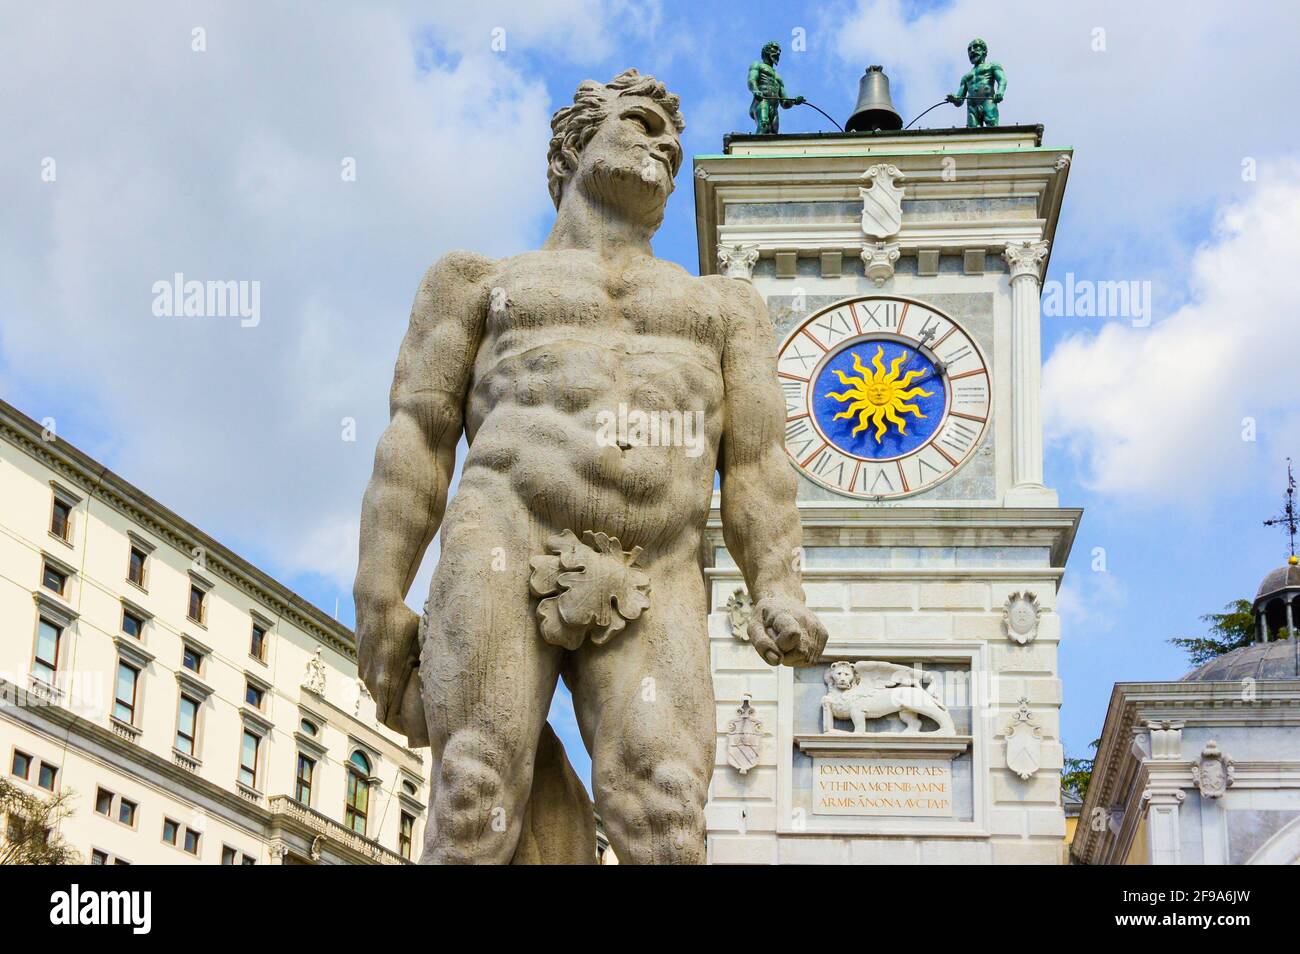 Udine, Italy (15h April 2021) - The statue of Hercules with the Clock Tower and an angle of the Castle in Piazza Libertà square Stock Photo